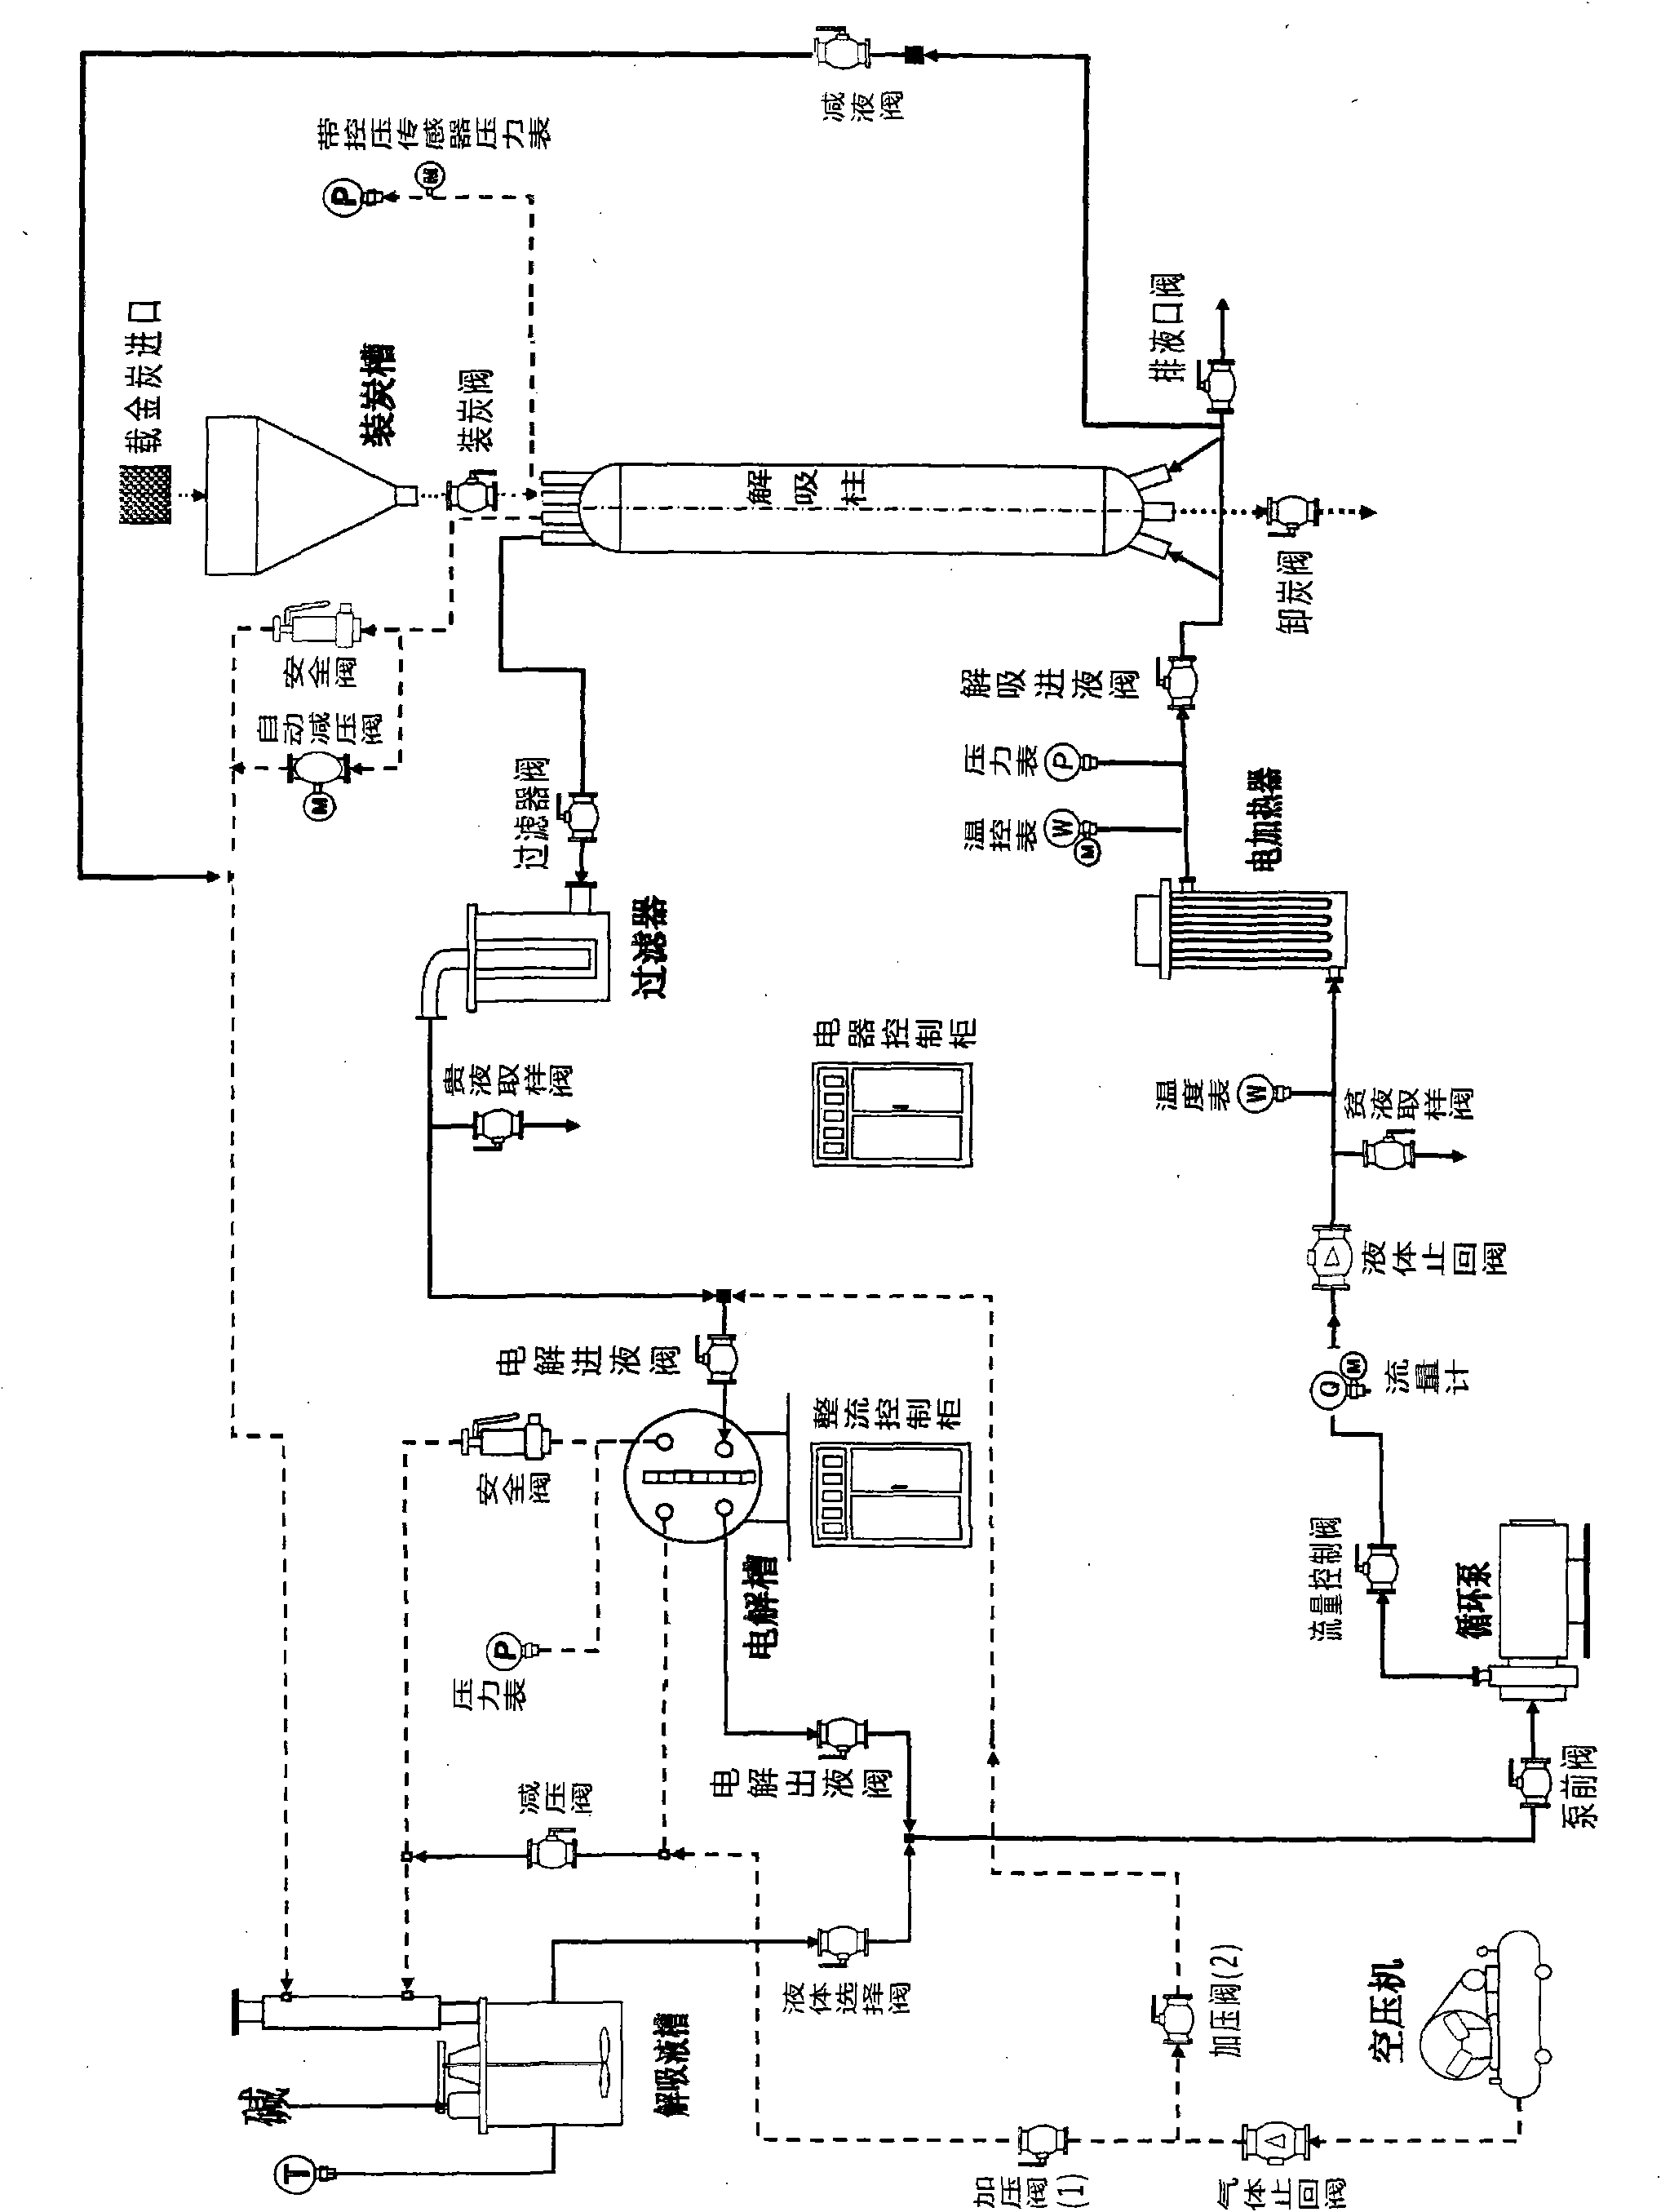 High-temperature cyanogen-free gold loaded carbon desorption system and control method thereof